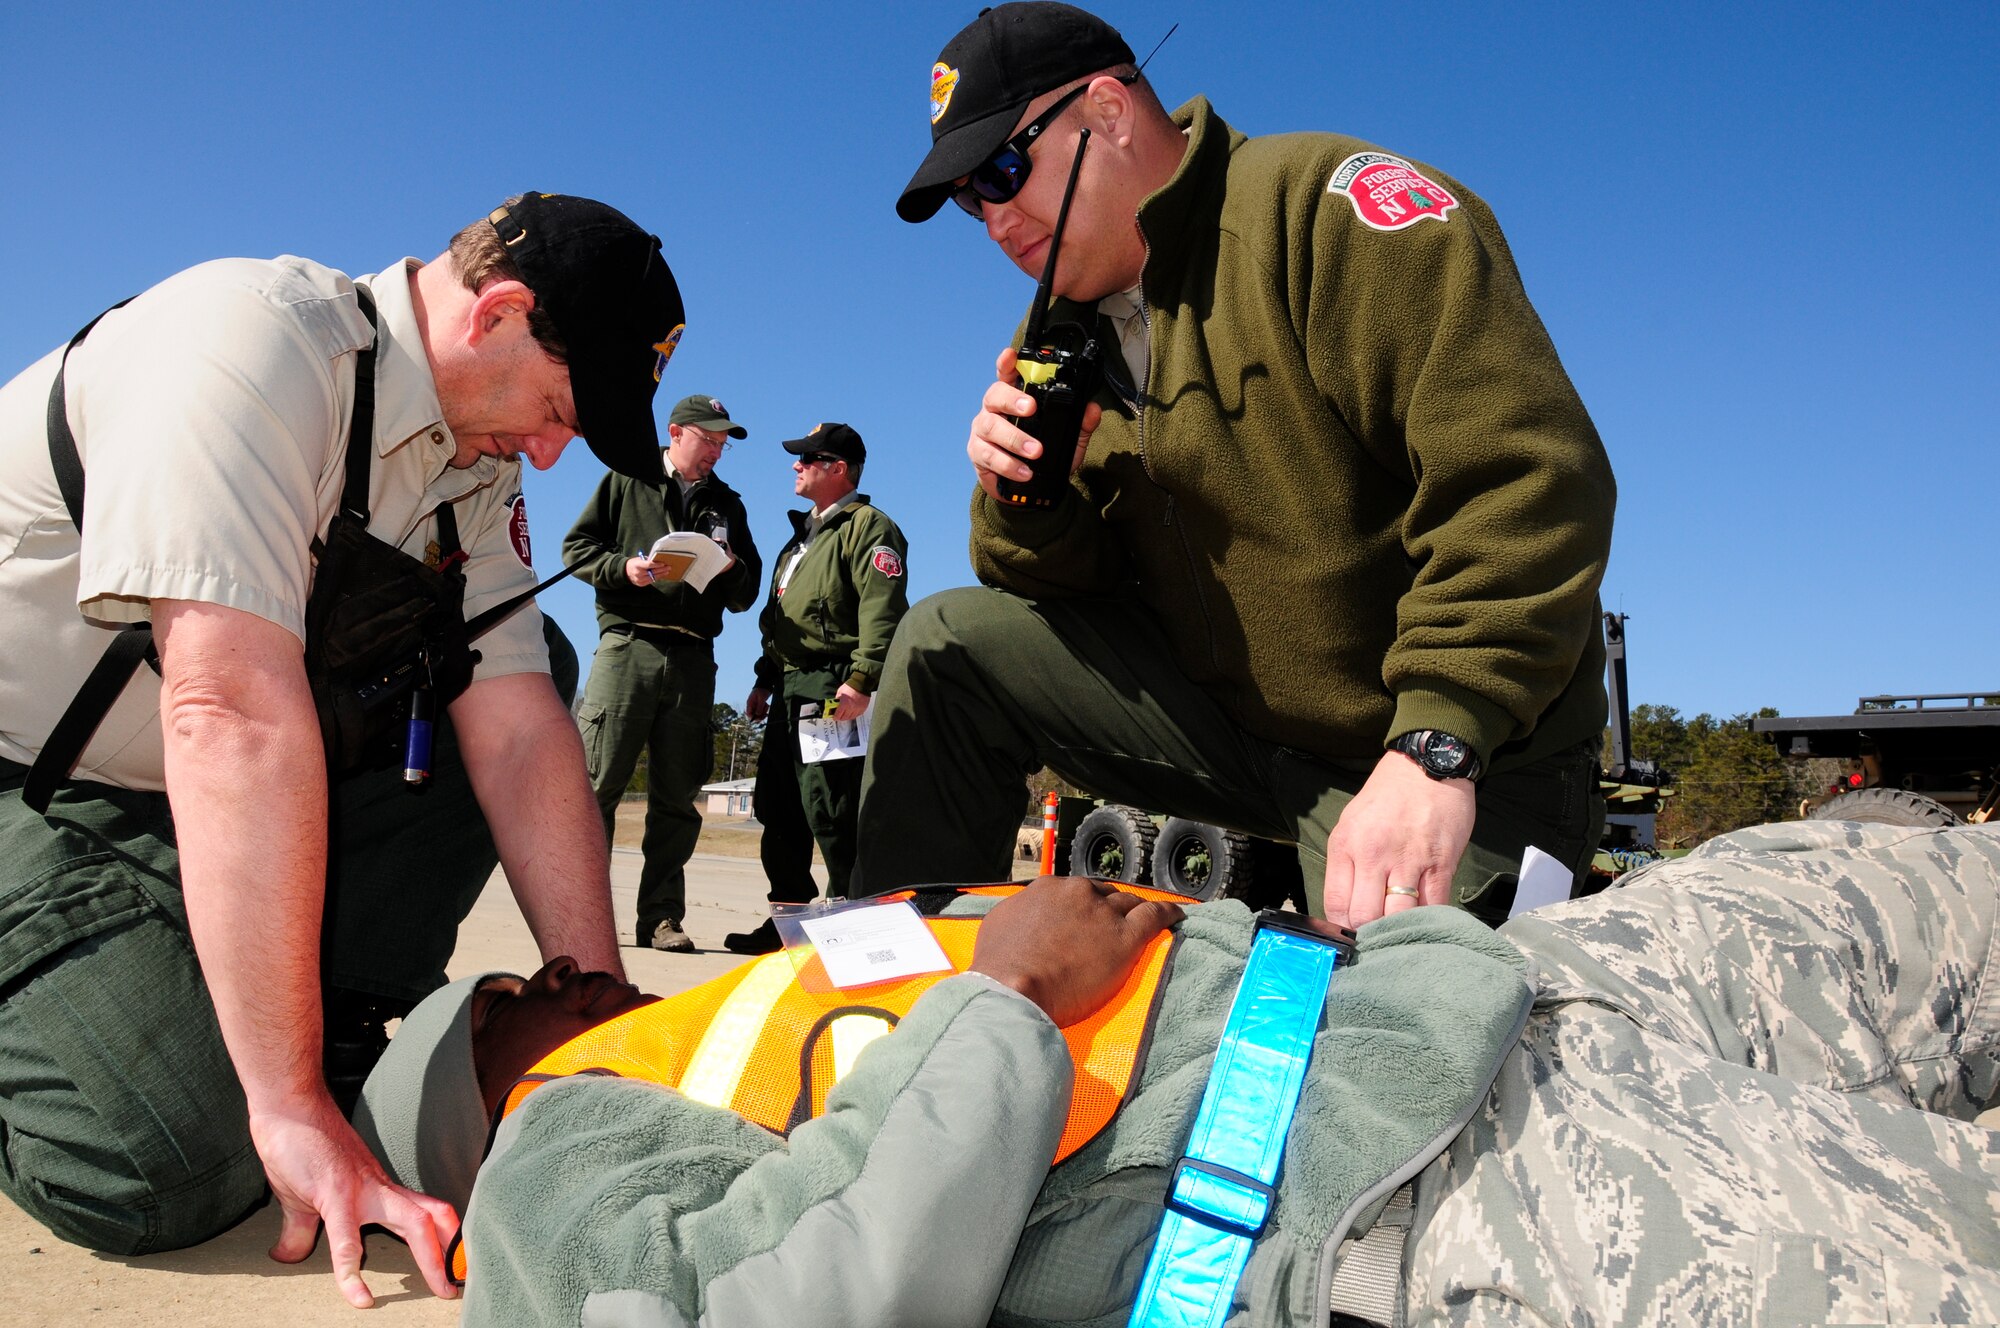 North Carolina Forest Service first responders assess a patient’s simulated injury during Vigilant Guard 2015 exercise held at the 145th Civil Engineer Squadron-Regional Training Site in New London, N.C., March 6-8, 2015. Vigilant Guard is an exercise that provides an opportunity for Army and Air National Guard, North Carolina Emergency Management and county civilian partners to come together to train as true partners in order to respond effectively to natural disasters. (U.S. Air National Guard photo by Master Sgt. Patricia F. Moran, 145th Public Affairs/Released)